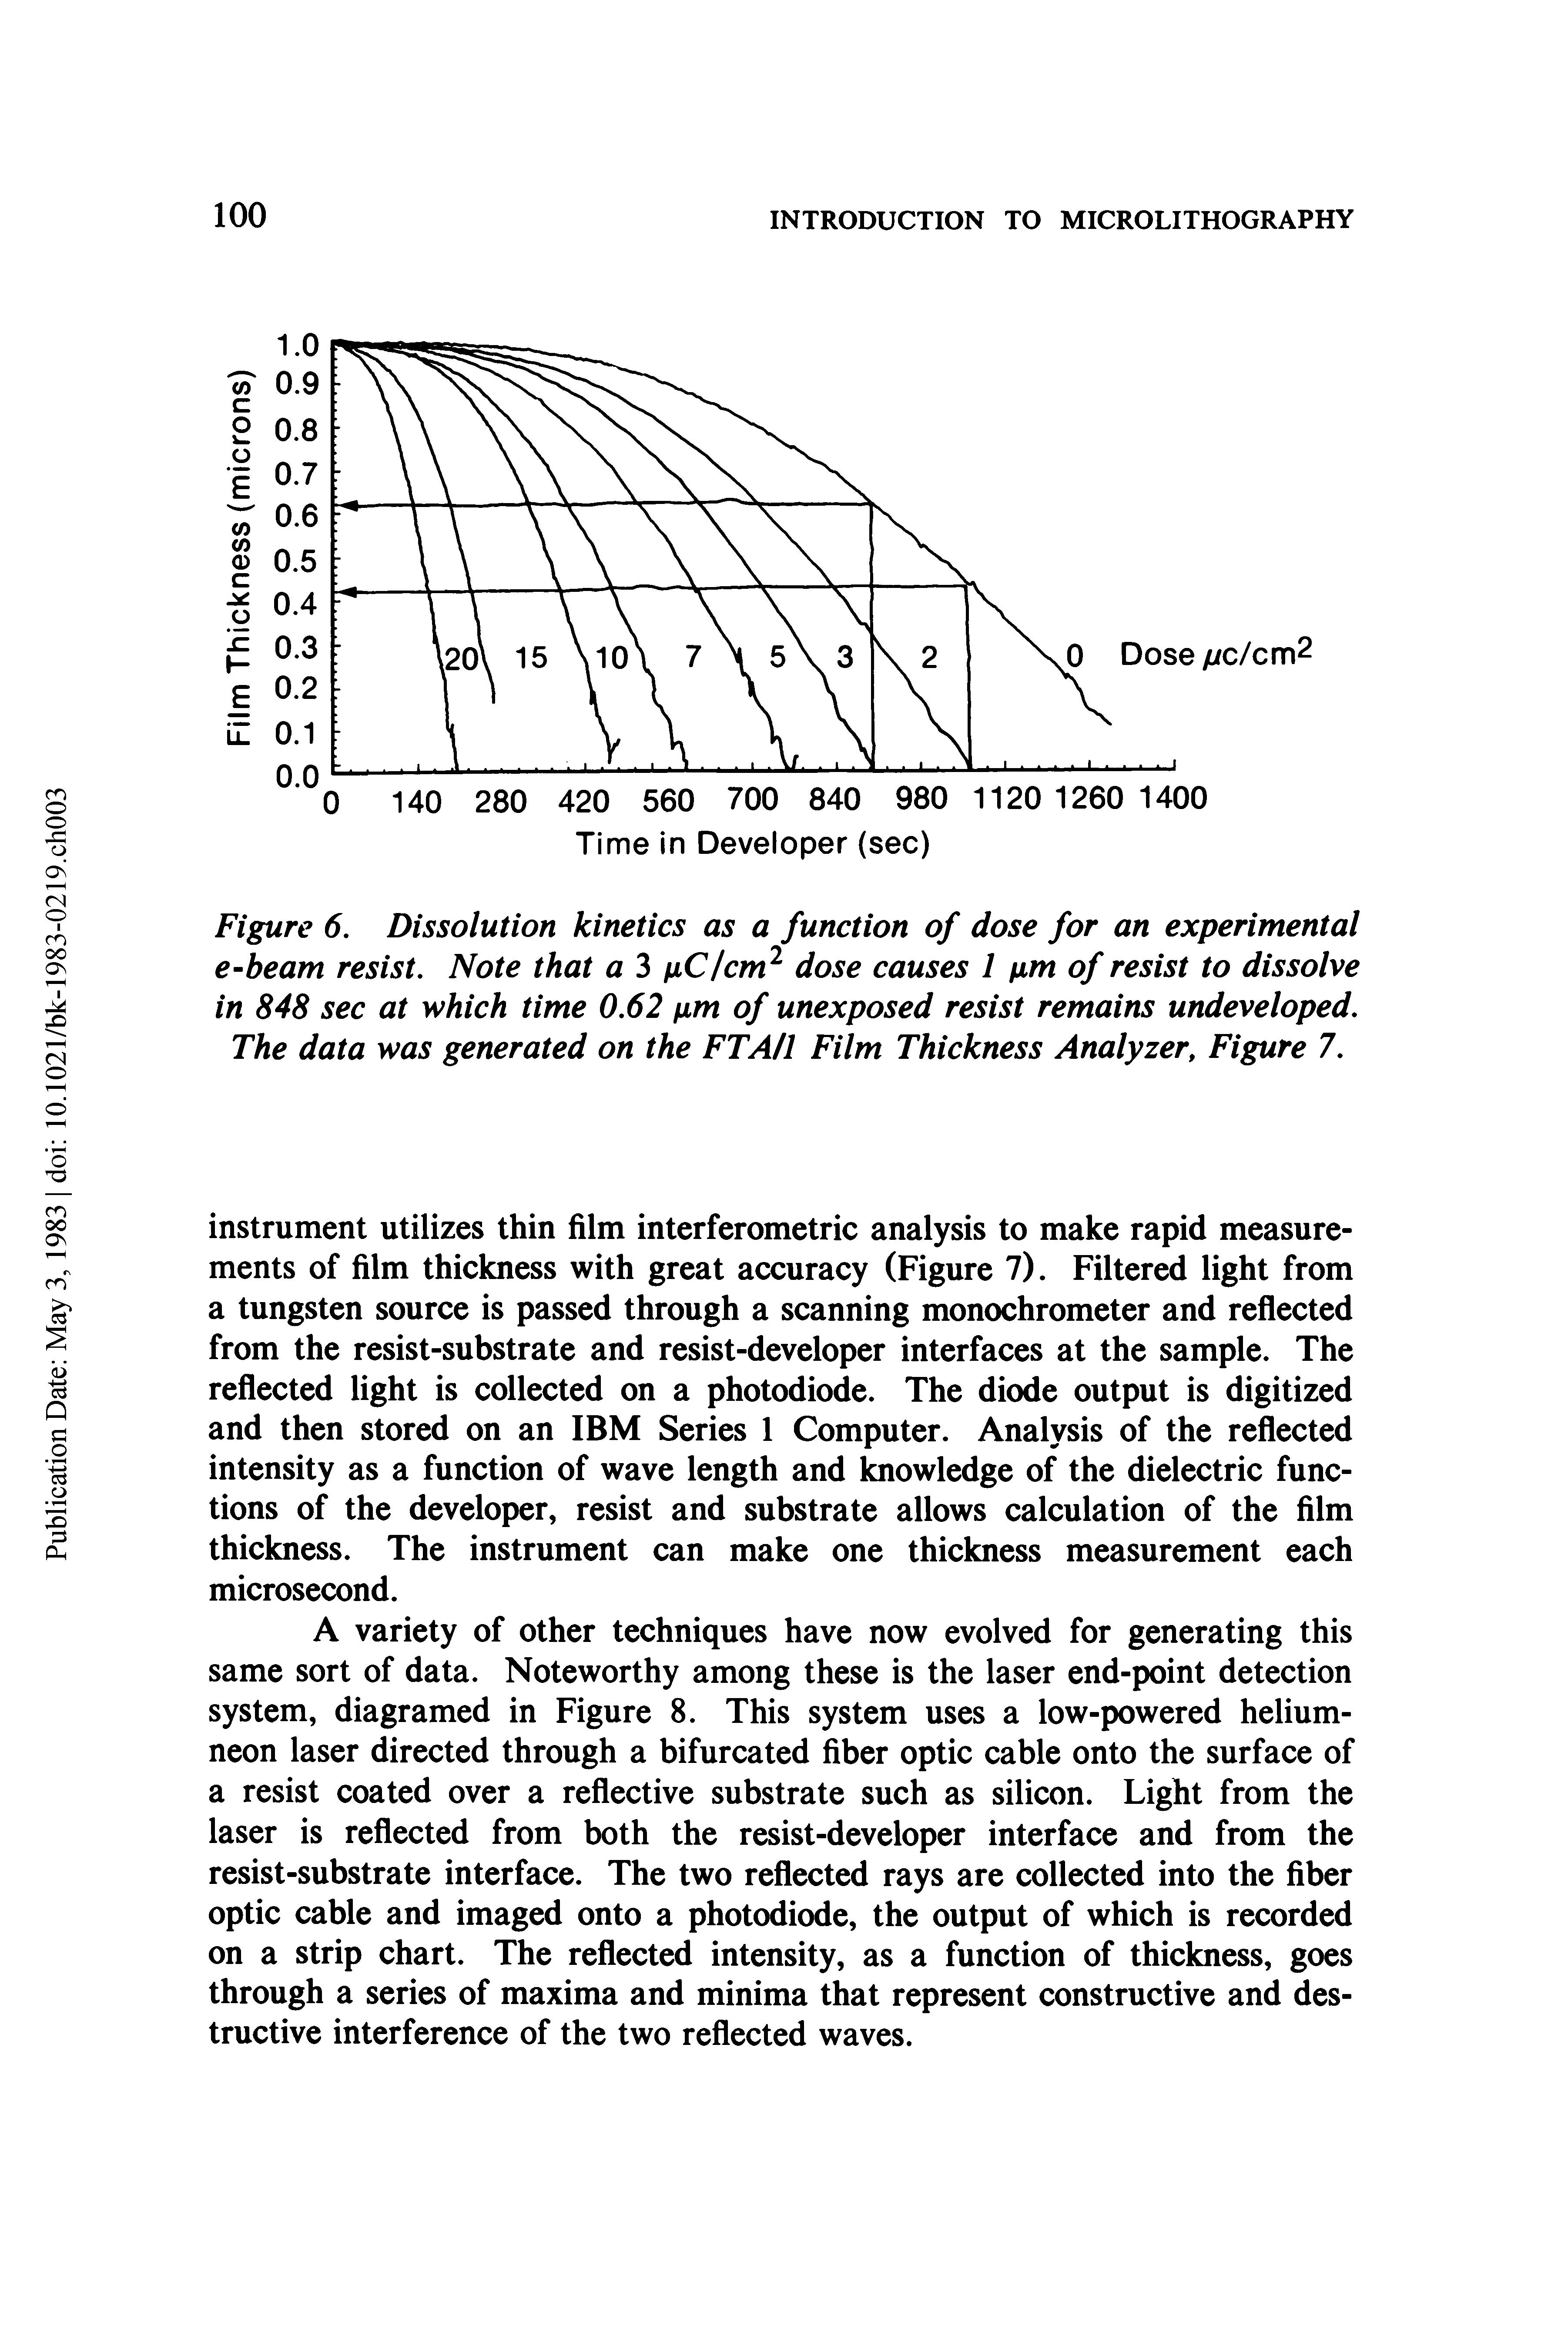 Figure 6. Dissolution kinetics as a function of dose for an experimental e beam resist. Note that a 3 pClcm dose causes 1 pm of resist to dissolve in 848 sec at which time 0.62 pm of unexposed resist remains undeveloped. The data was generated on the FT AH Film Thickness Analyzer, Figure 7.